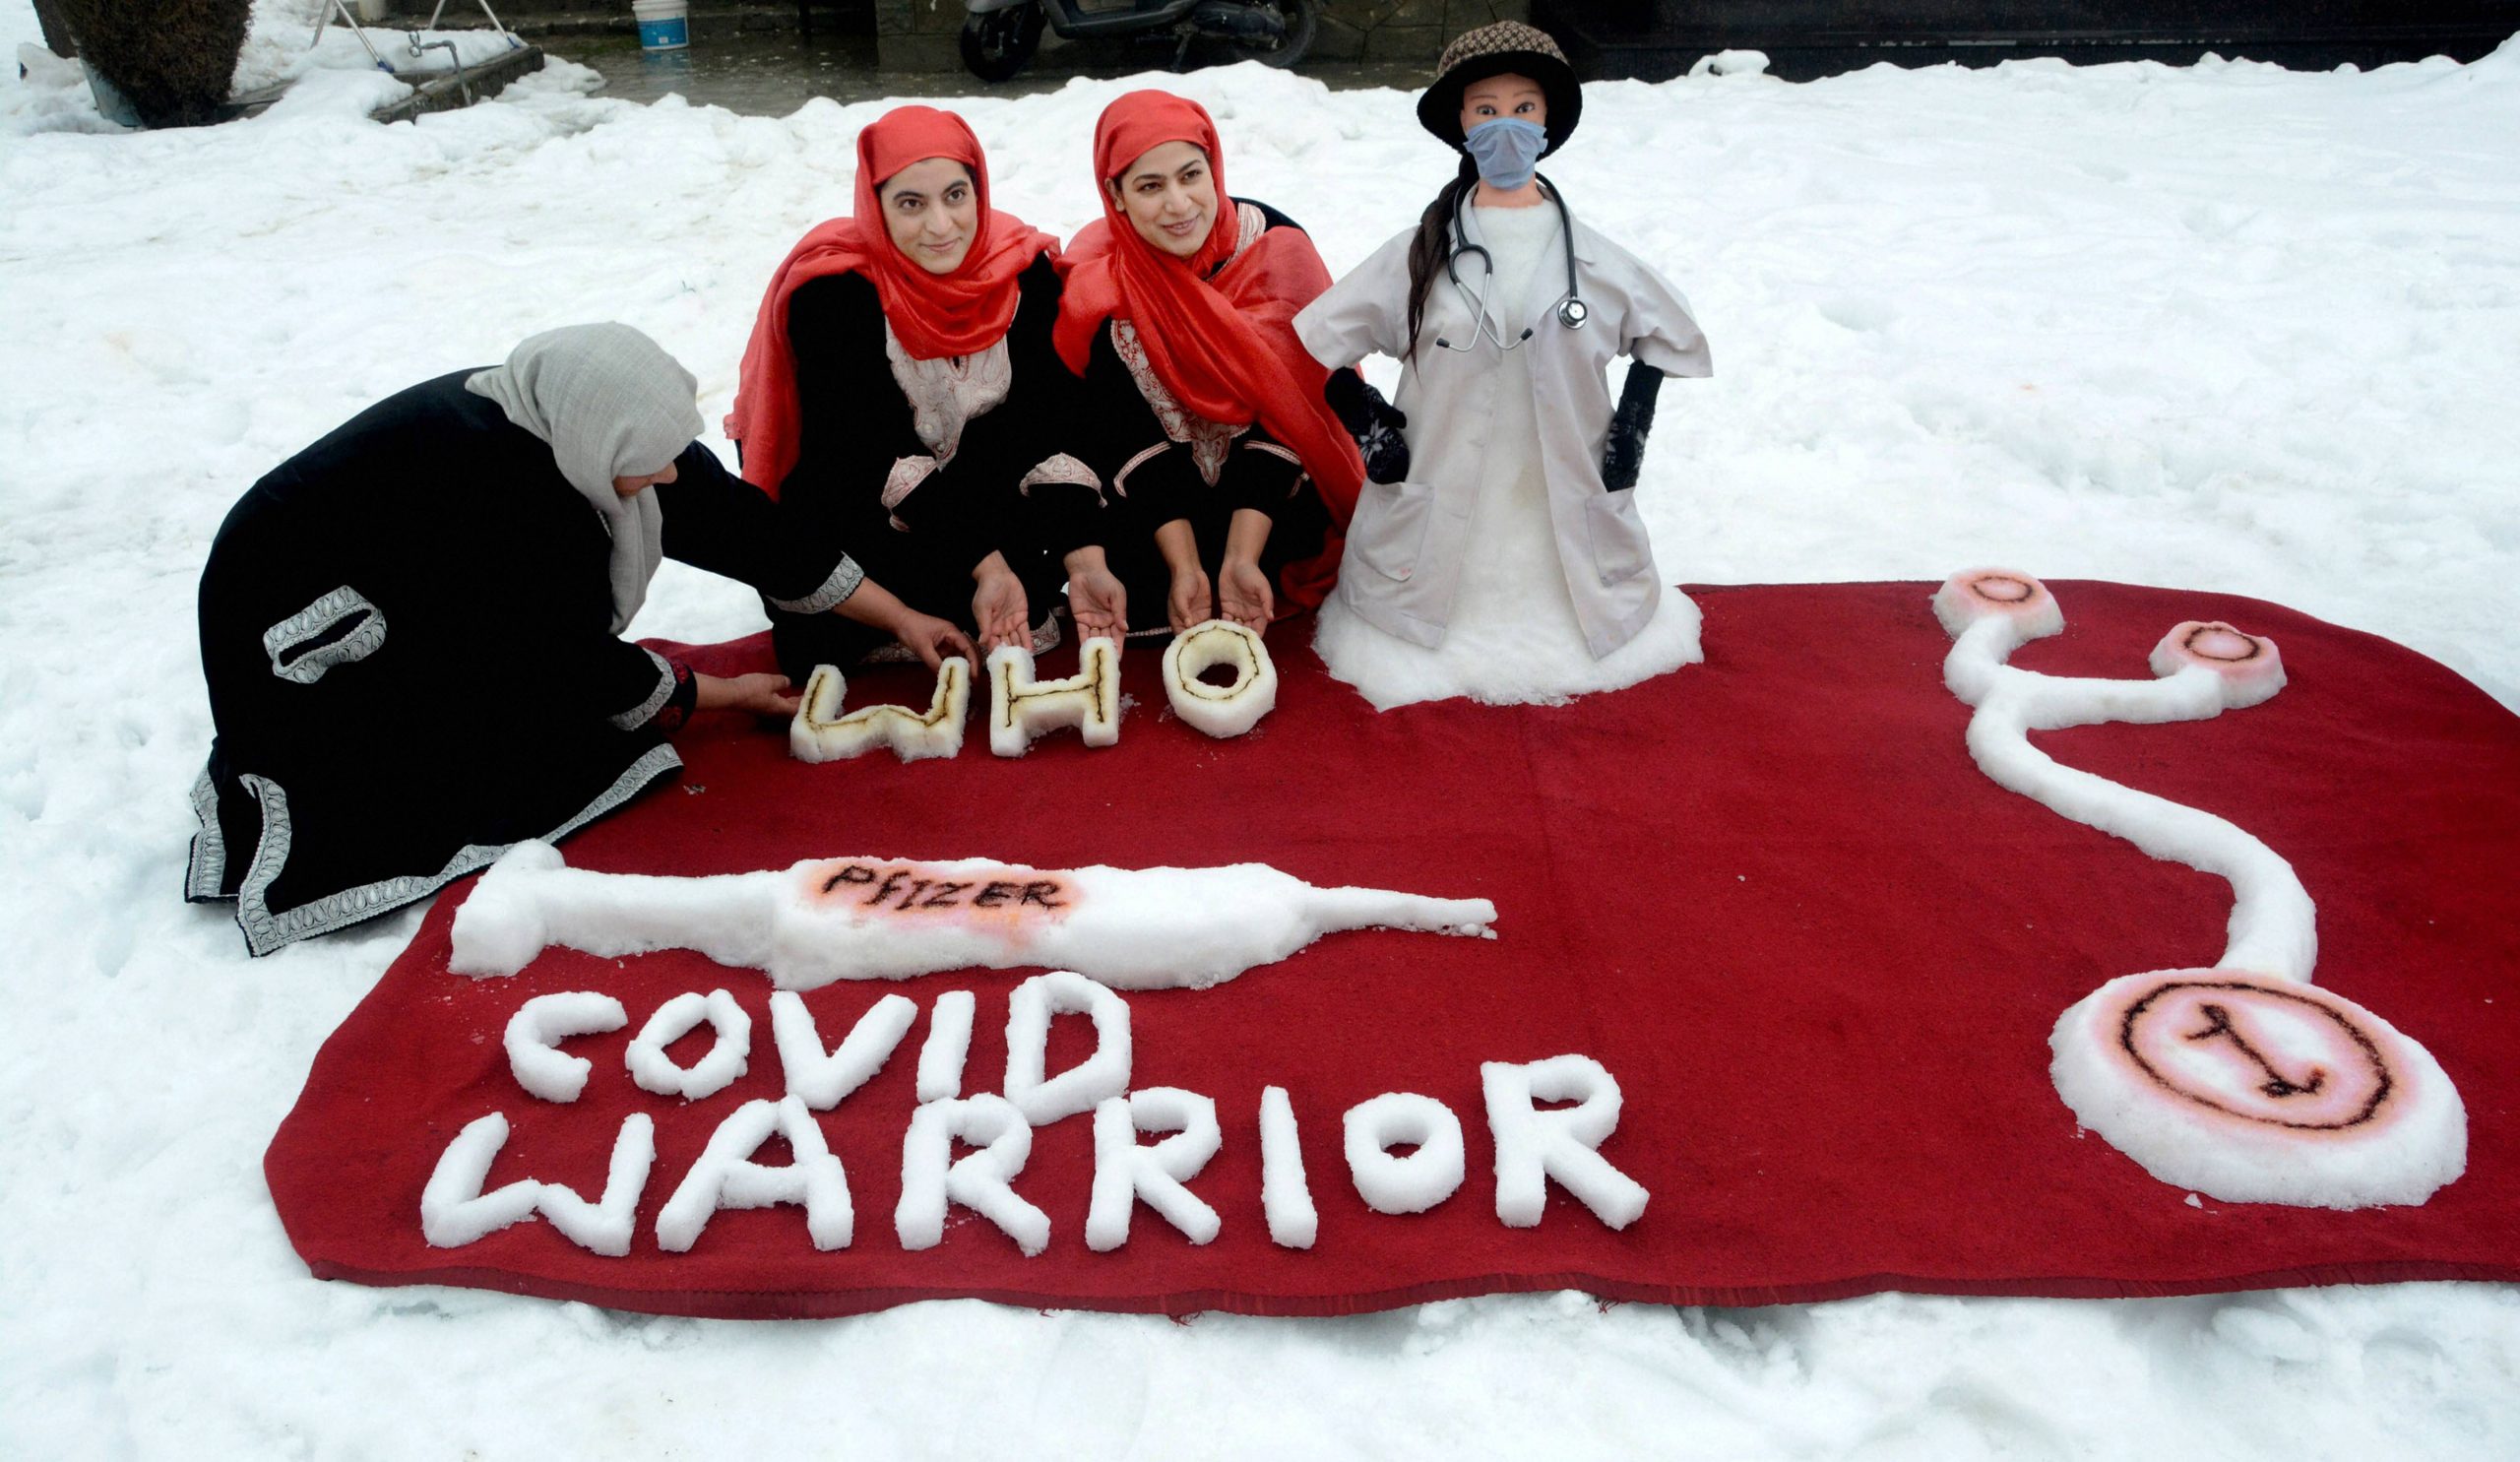 Kashmir sisters’ moving tribute to COVID-19 warriors through snow sculptures